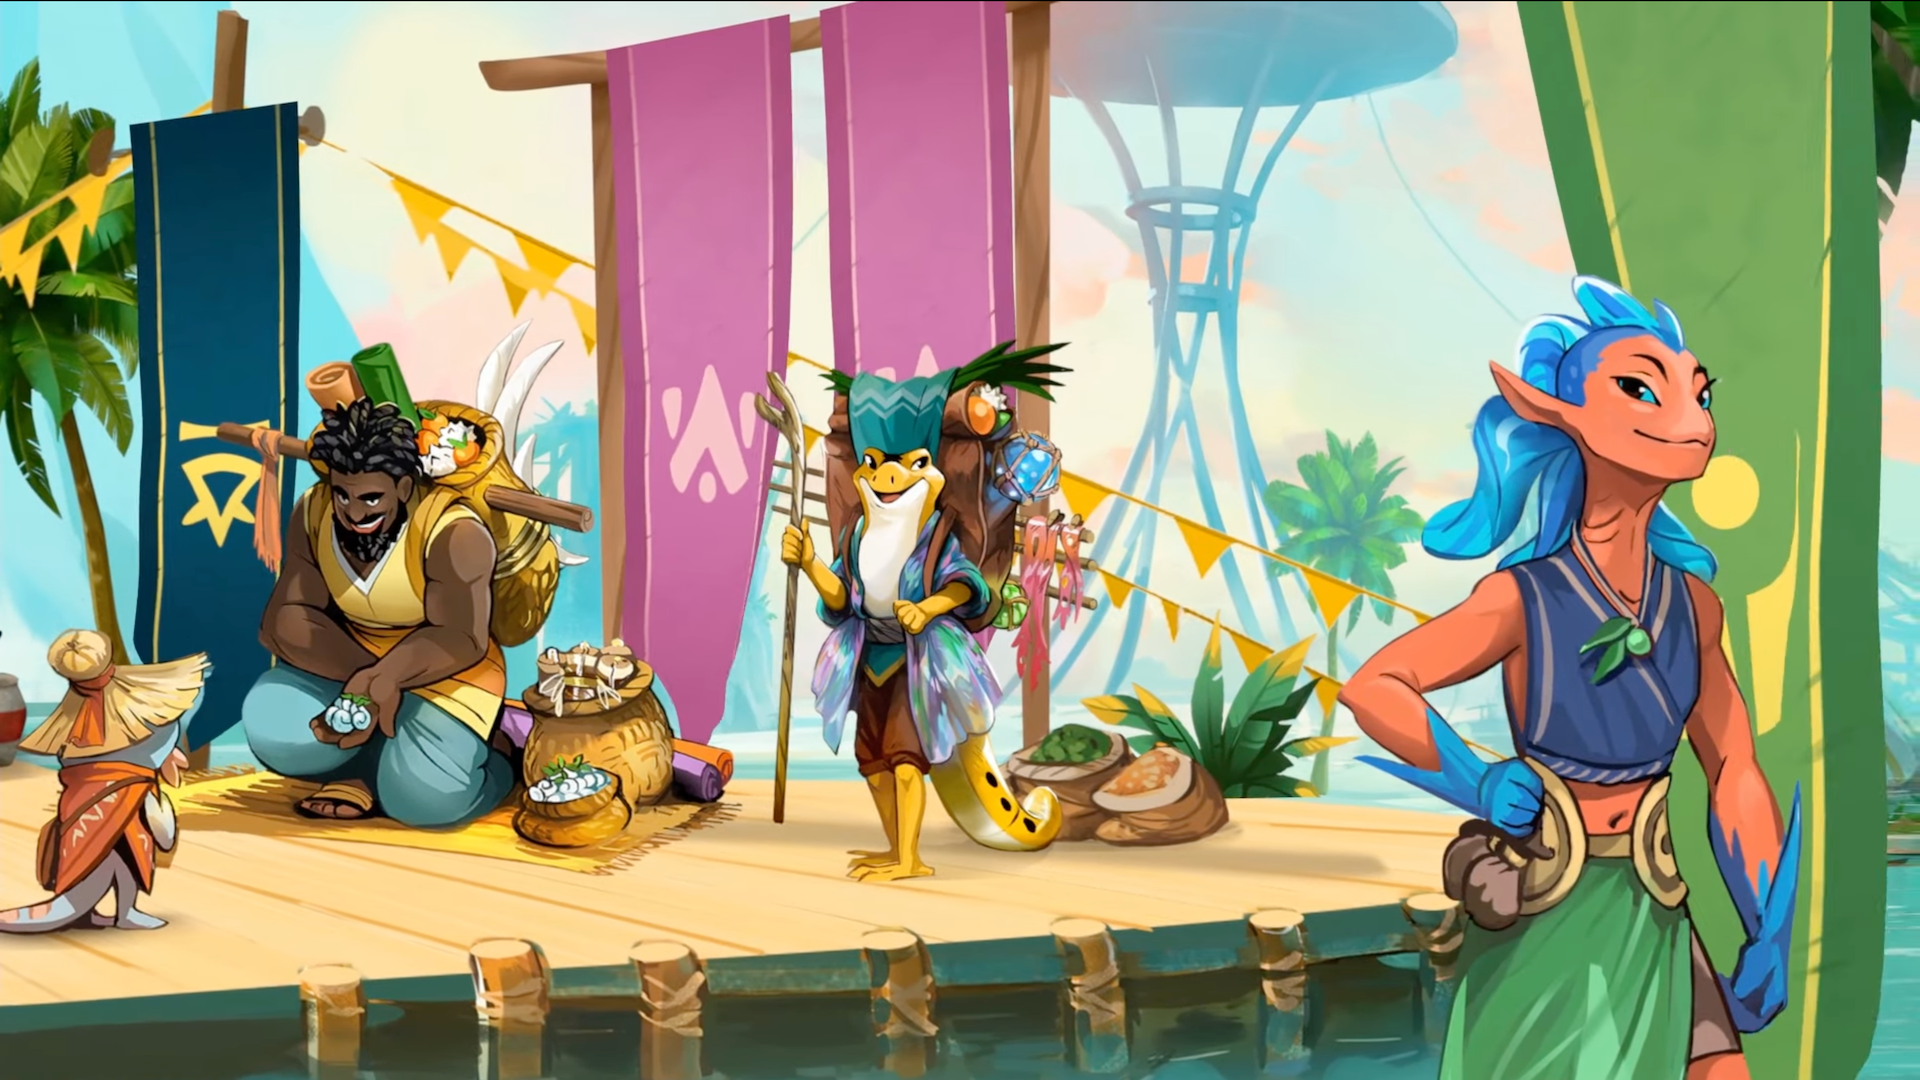 Human, reptilian and amphibious merchants compete during the Banner Festival, which is the setting of an upcoming board game in the Tidal Blades series.